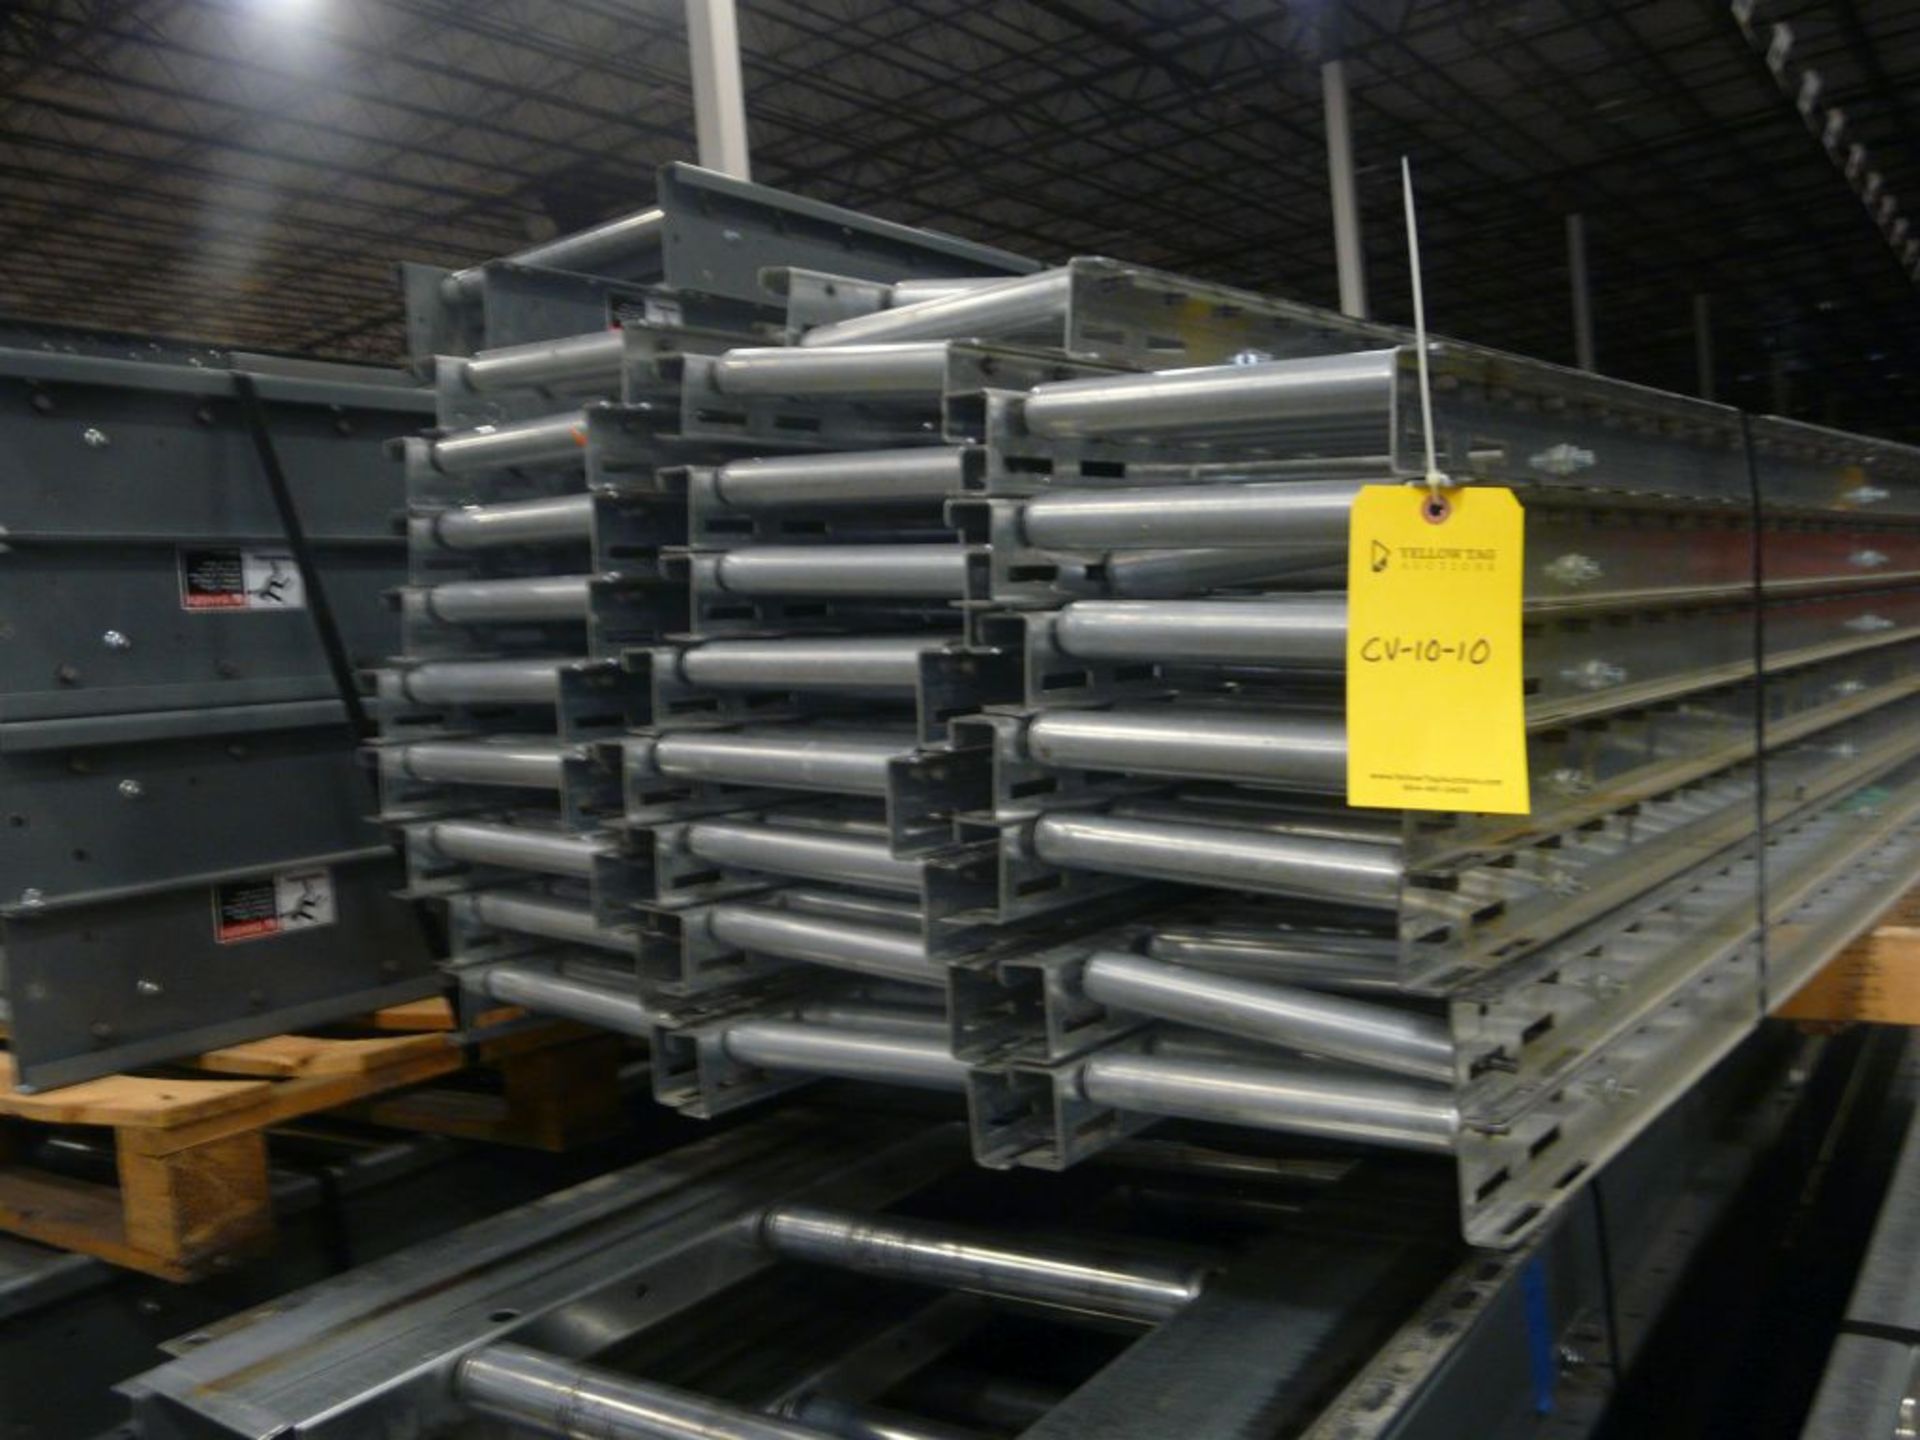 Lot of (24) Conveyors - 10'L x 10"W; Tag: 223544 - $30 Lot Loading Fee - Image 2 of 2